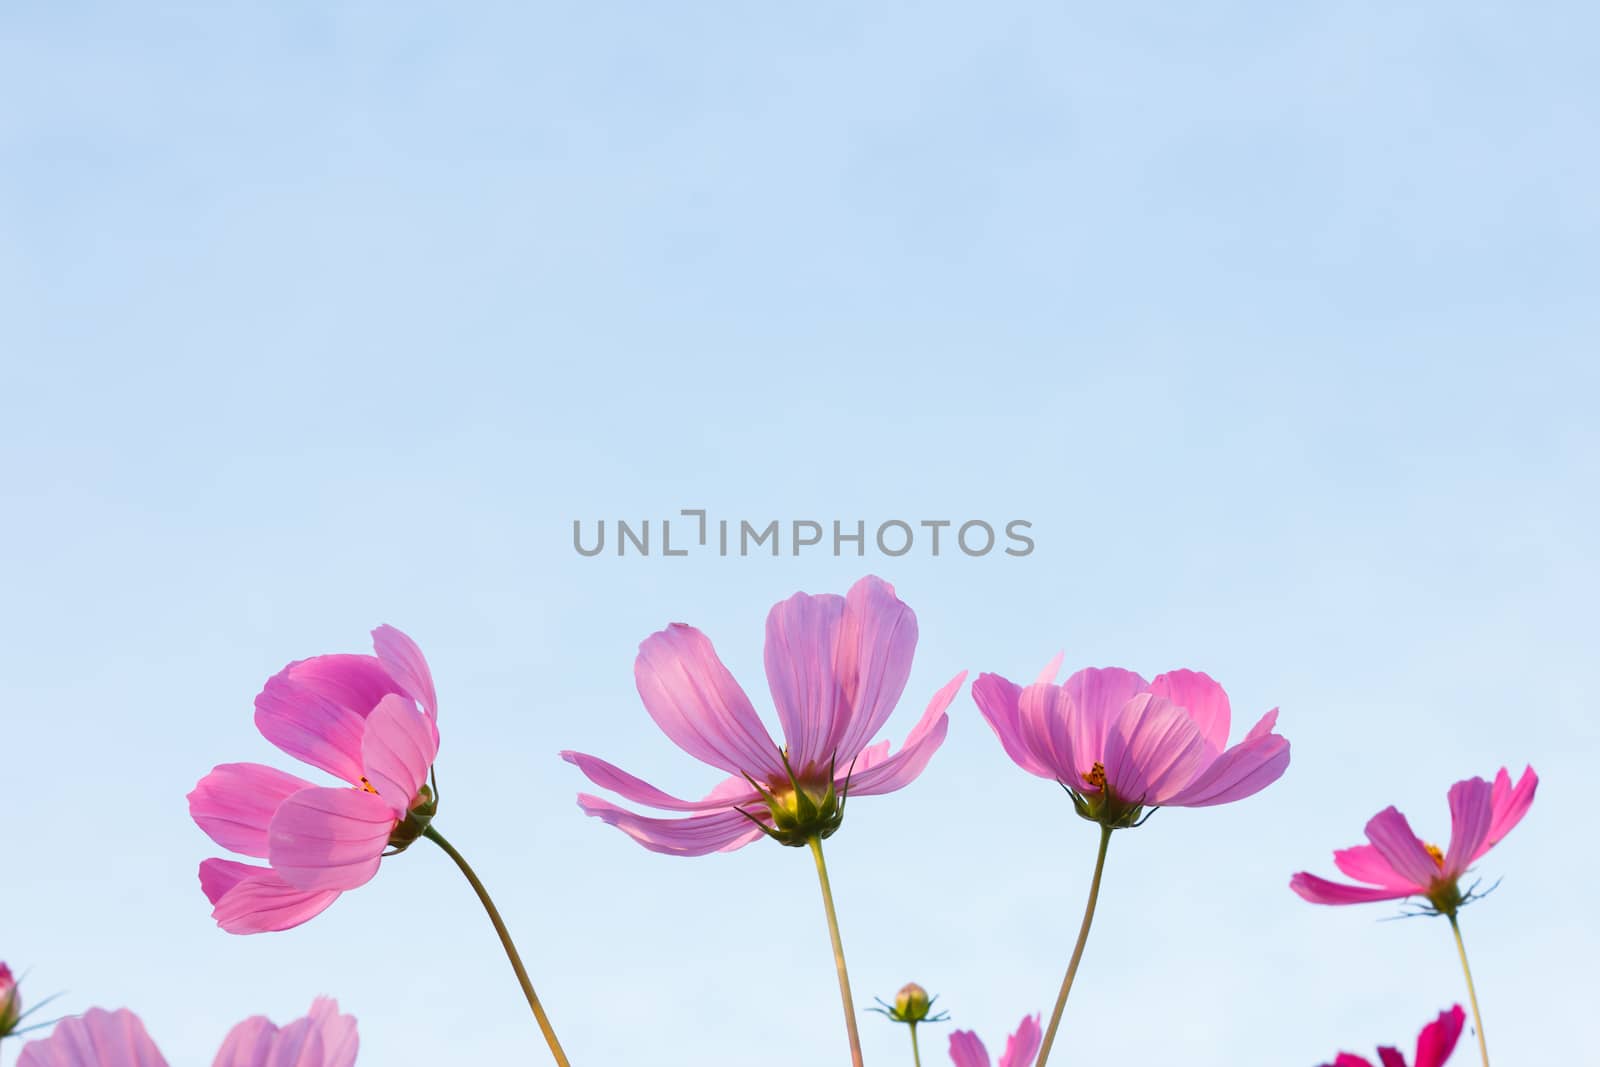  pink cosmos flowers on sky background by vitawin